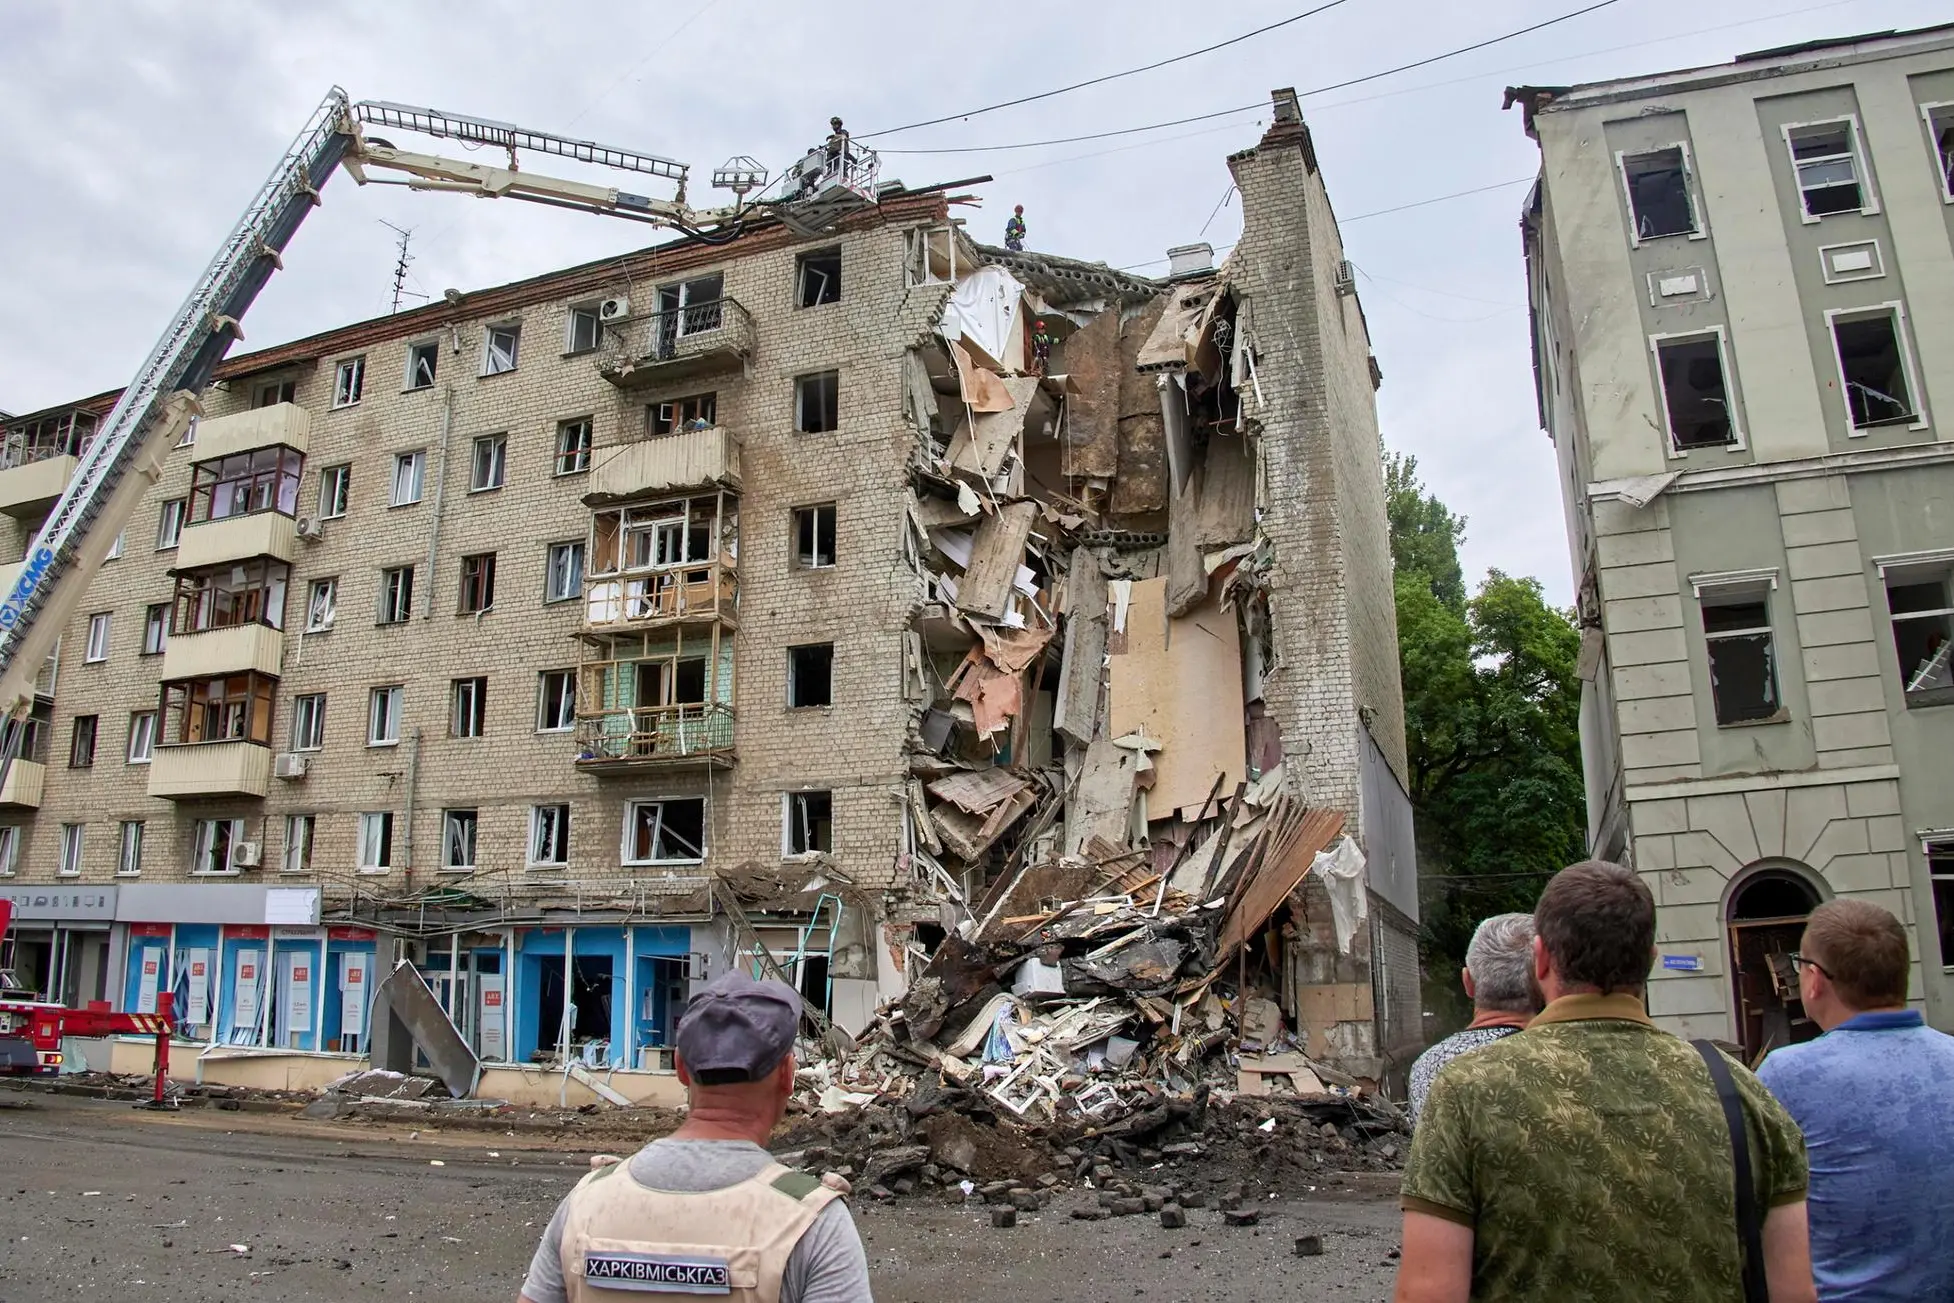 epa10065459 Locals look on a damaged residential building following a Russian rocket strike hitting the city of Kharkiv, Ukraine, 11 July 2022. At least six people were killed and 31 injured in the Kharkiv area on 11 July, the head of the Kharkiv regional administration Sinegubov said. Kharkiv and surrounding areas have seen increased shelling and airstrikes from Russian forces. Russian troops on 24 February entered Ukrainian territory, starting a conflict that has provoked destruction and a humanitarian crisis. EPA/SERGEY KOZLOV